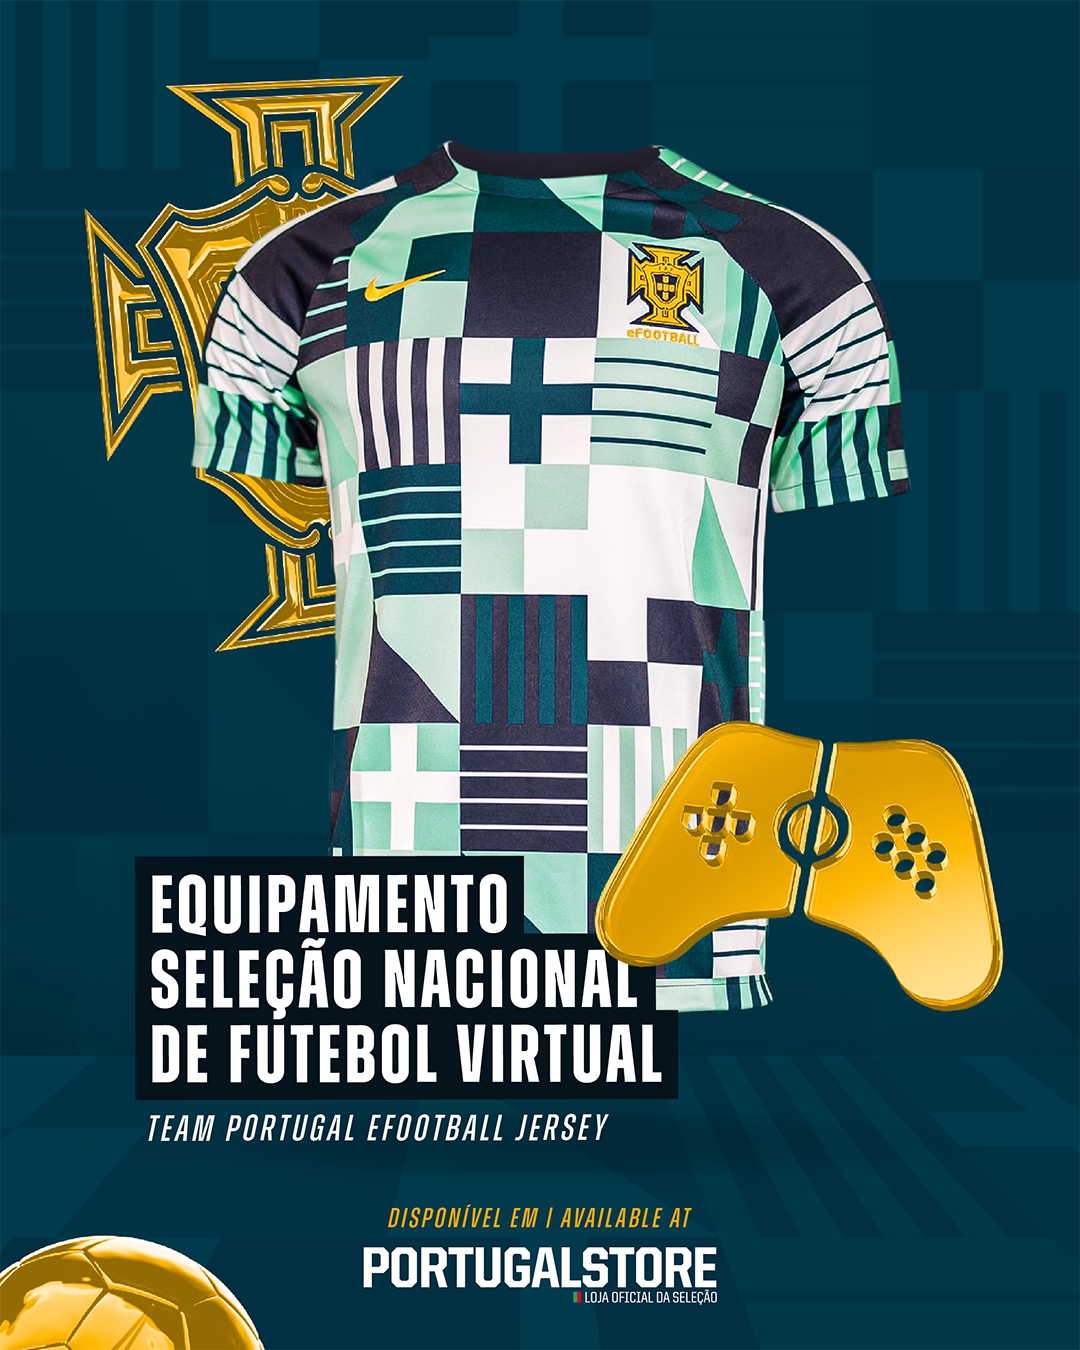 New kit for Portugals' eFootball National Team. Portugal is the first team ever to have an exclusive esports kit designed by Nike.